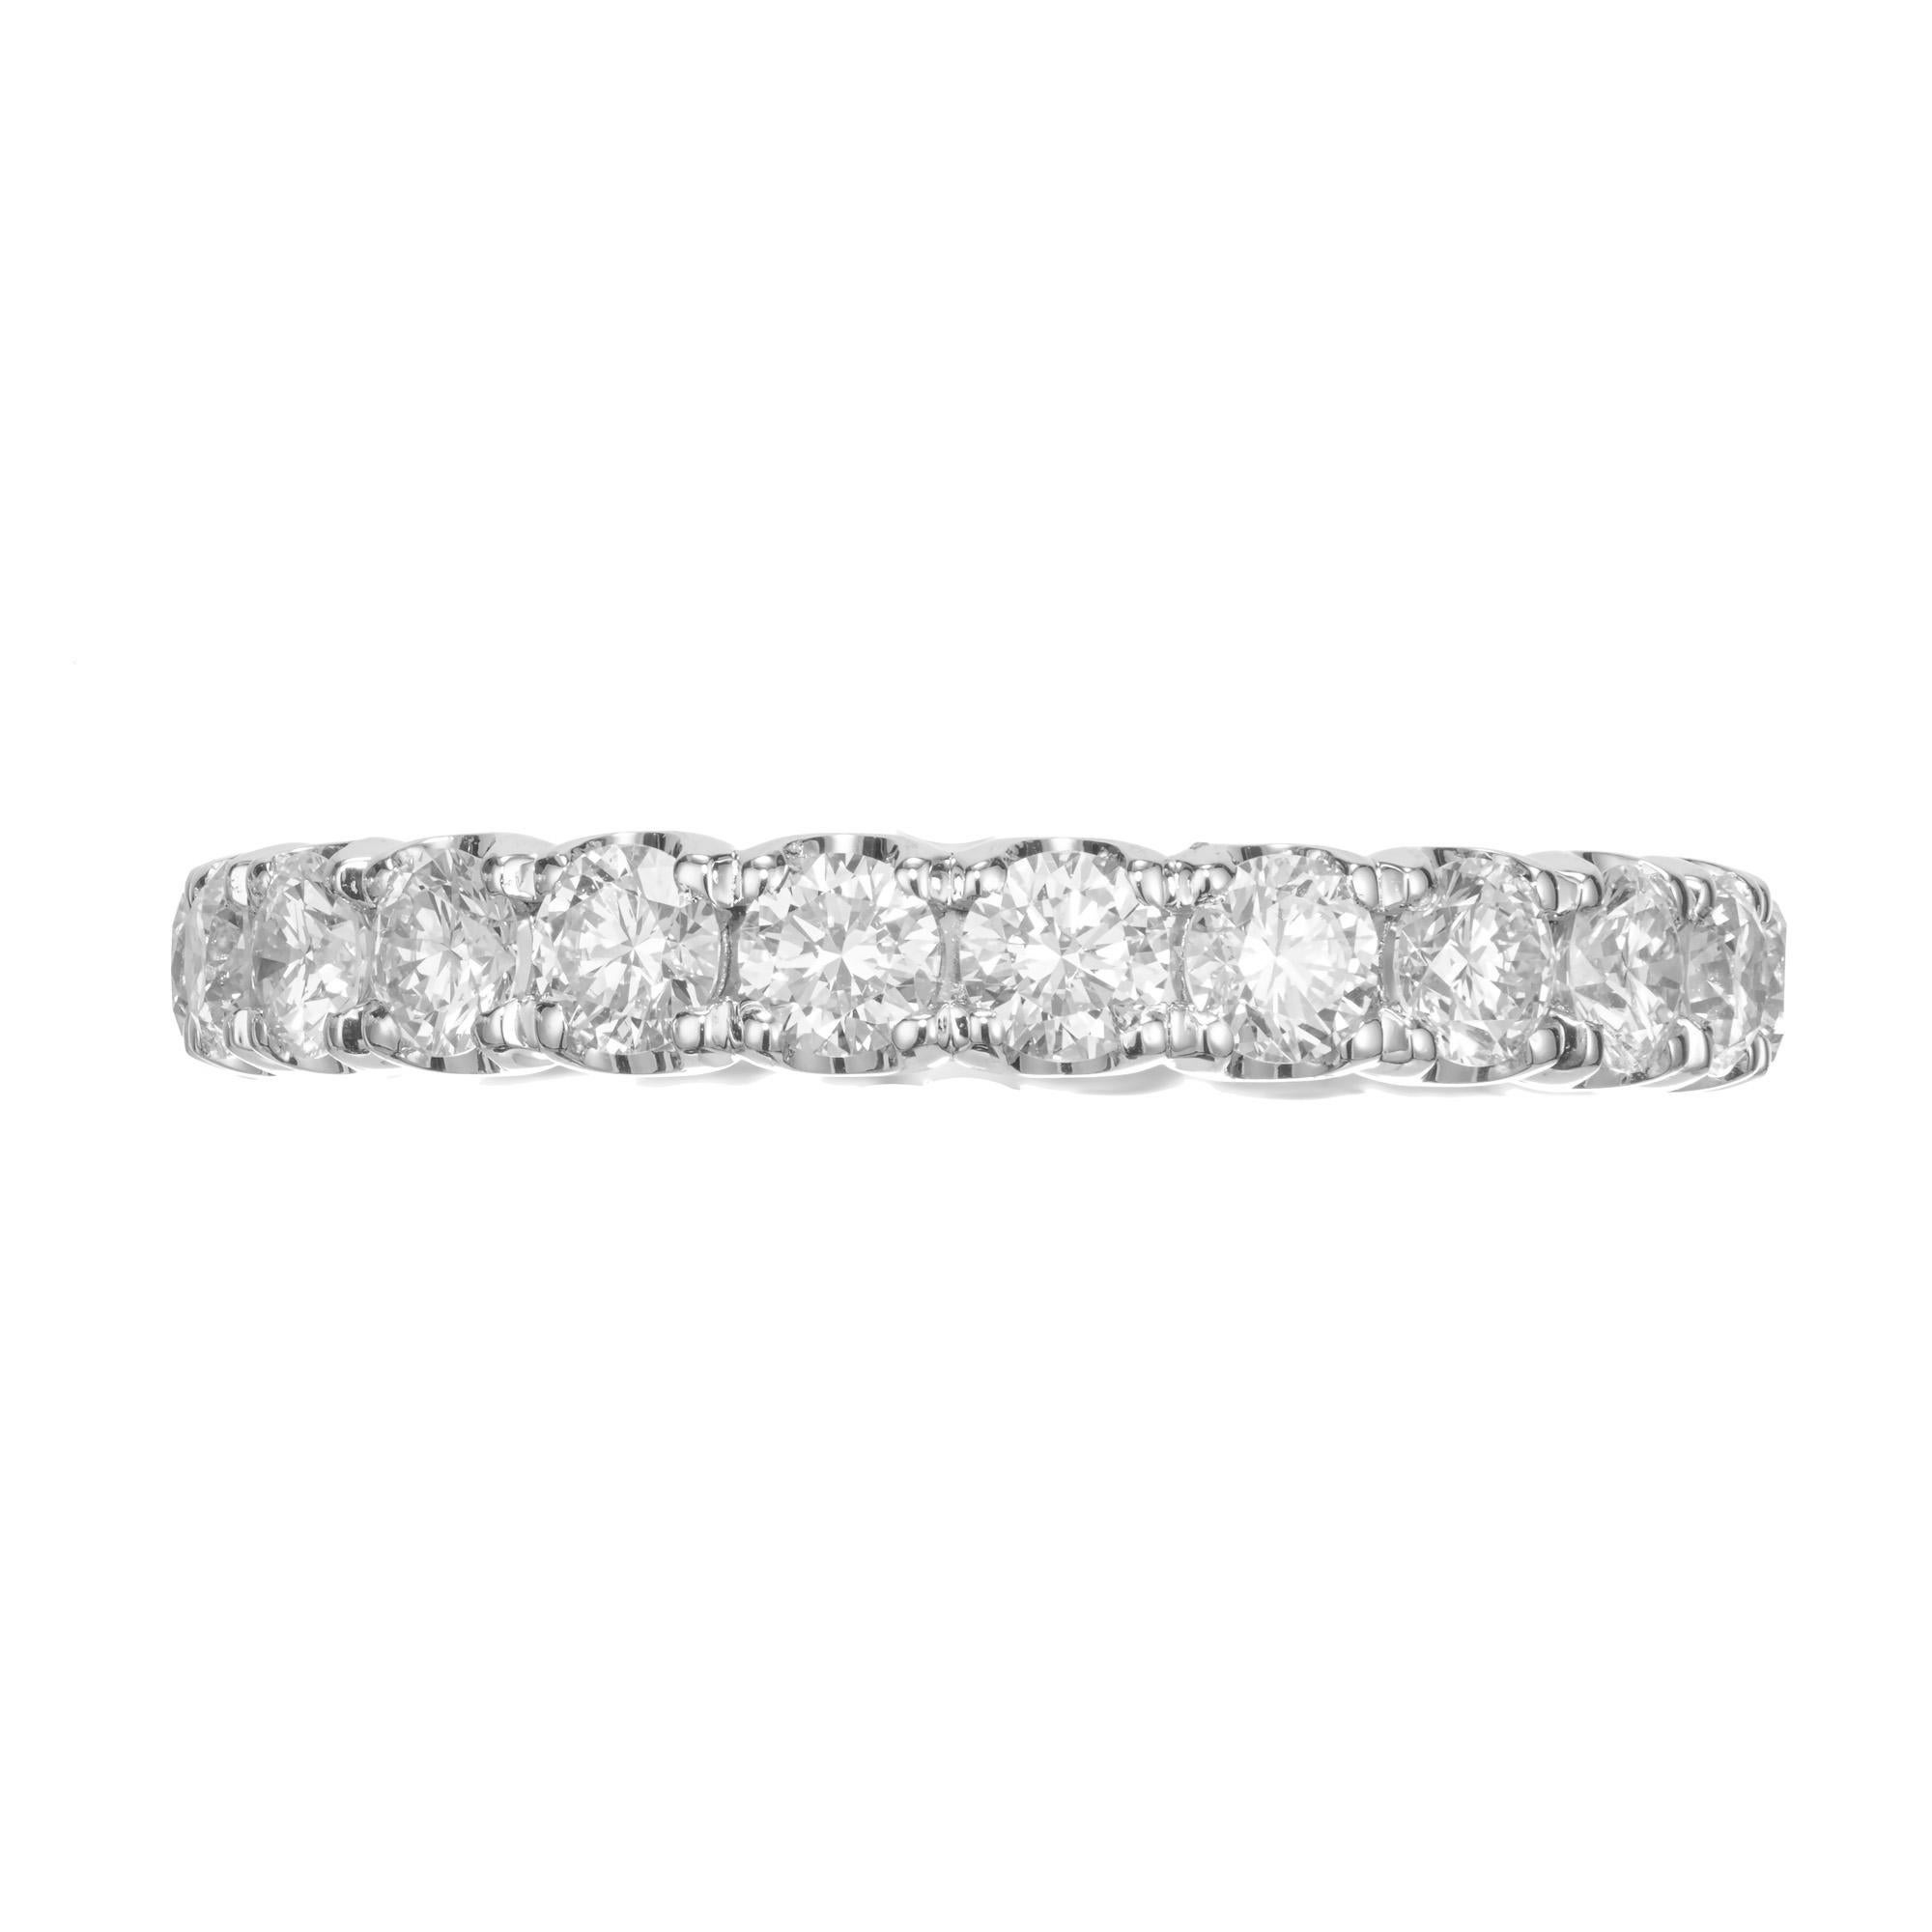 Beautiful curved prong diamond wedding band ring. 22 round brilliatn cut diamonds totaling 1.97cts, set in a solid platinum common prong eternity setting. Not sizable. Can be ordered in any diamond or finger size. Designed and crafted in the Peter